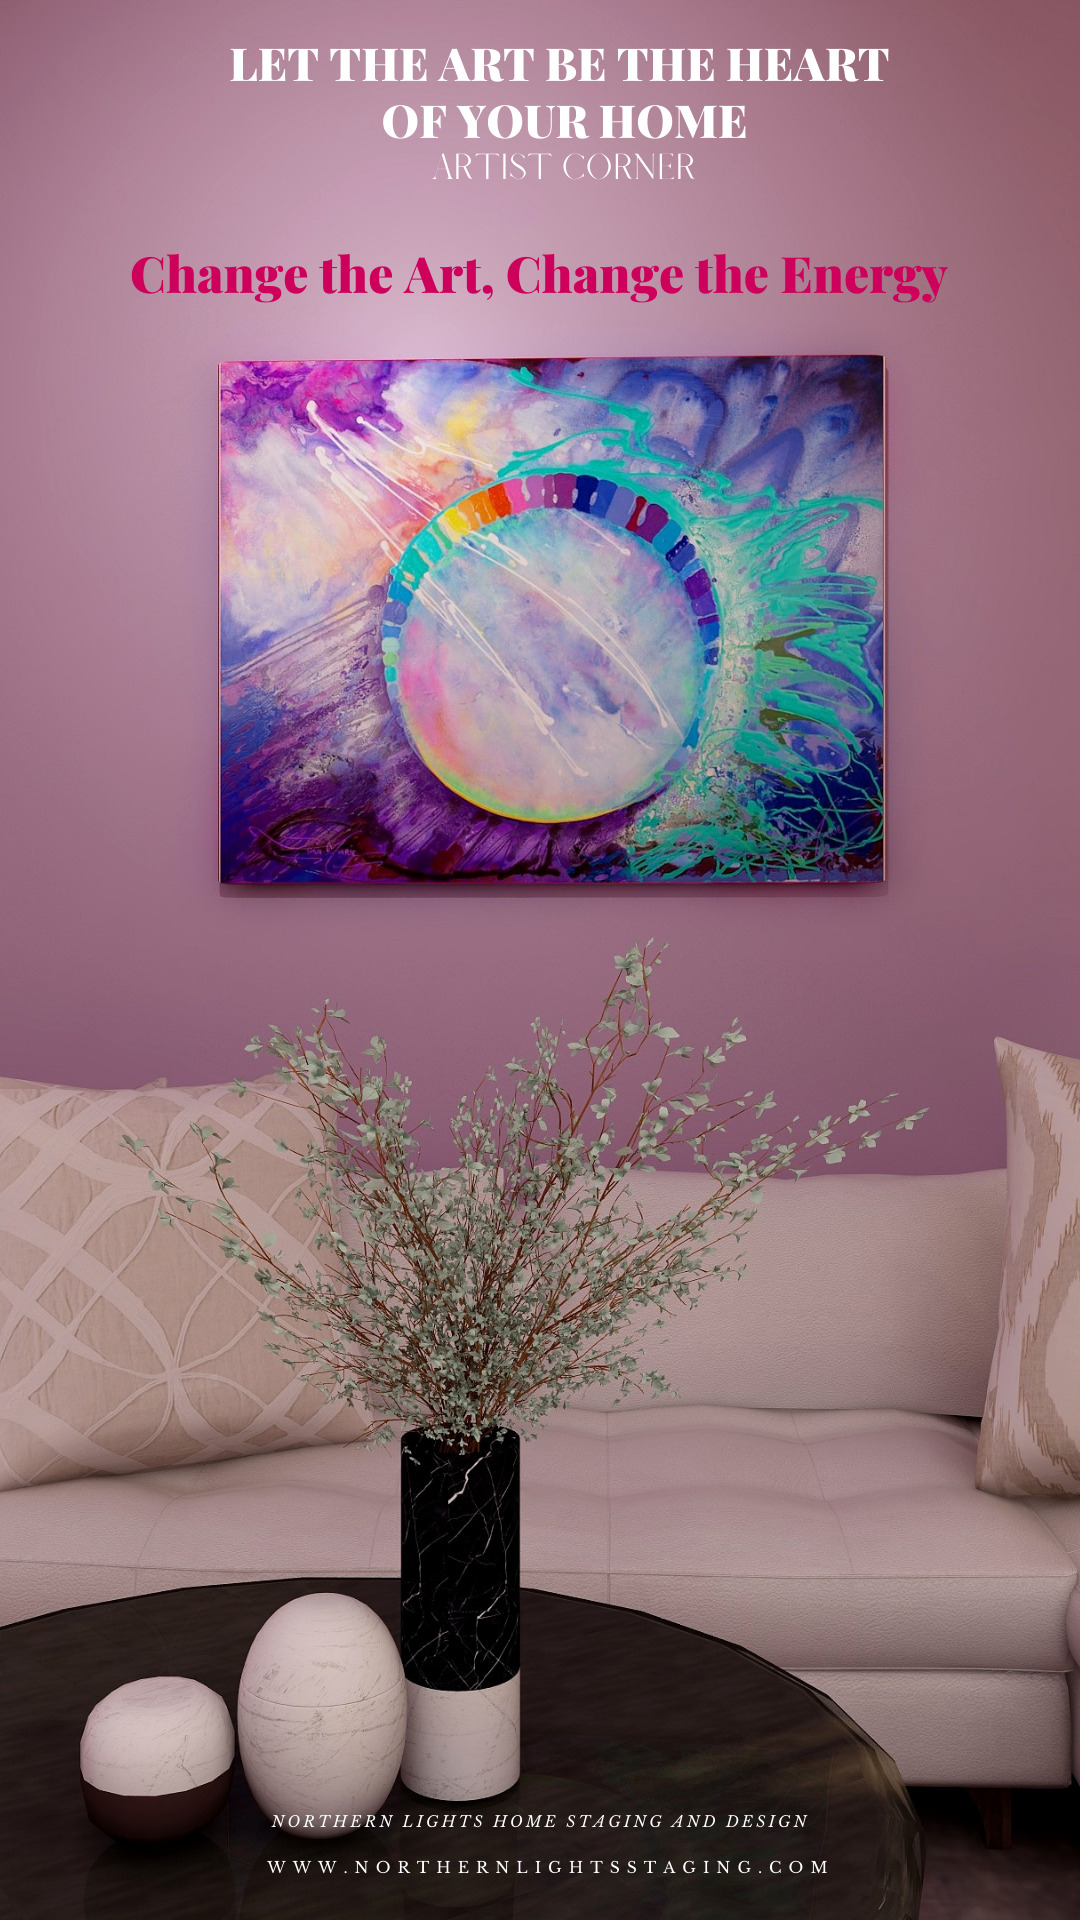 Let the Art be the Heart of Your Home. "Oogenesis" by Joan Marie Art in an Edesign by Northern Lights Home Staging and Design